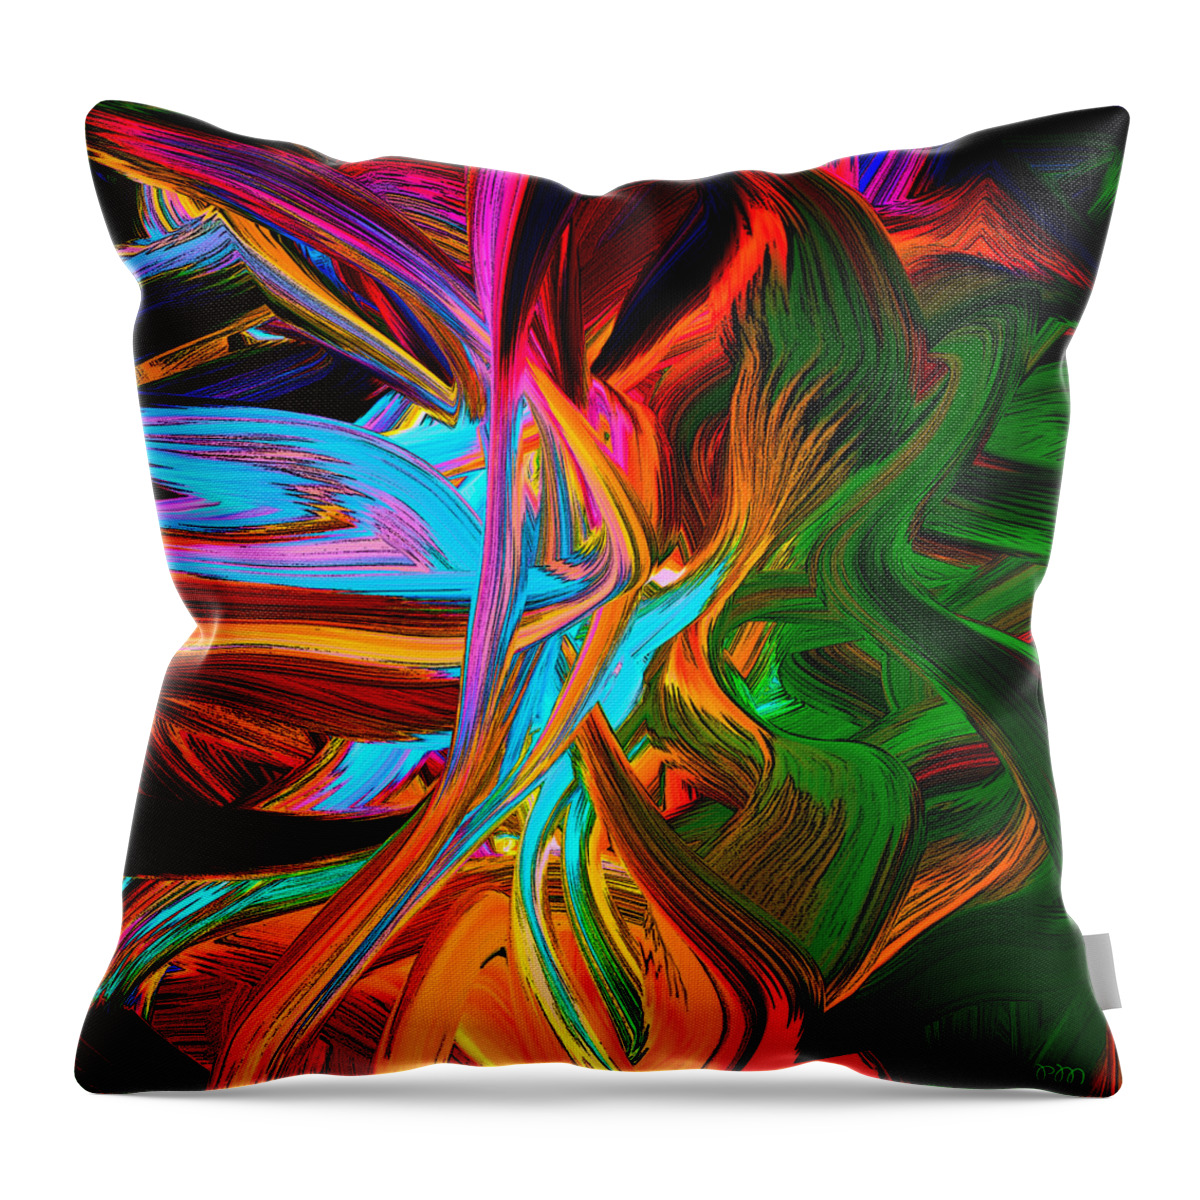 Soft Scape Original Contemporary Throw Pillow featuring the digital art Prime Green 9 by Phillip Mossbarger